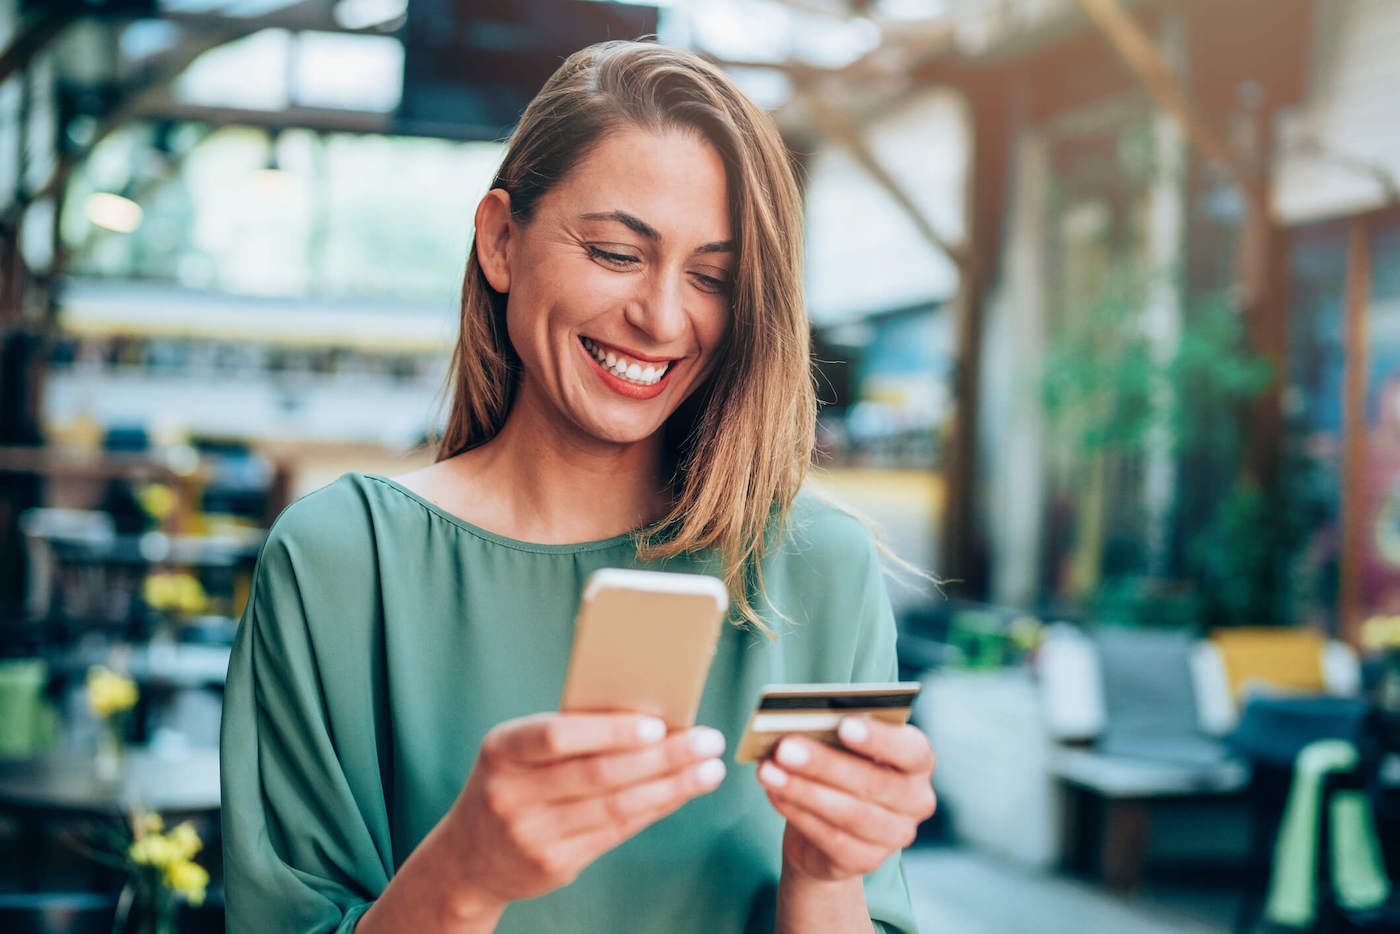 A Woman Smiles At Her Credit Card While Holding Her Phone.jpg.optimal